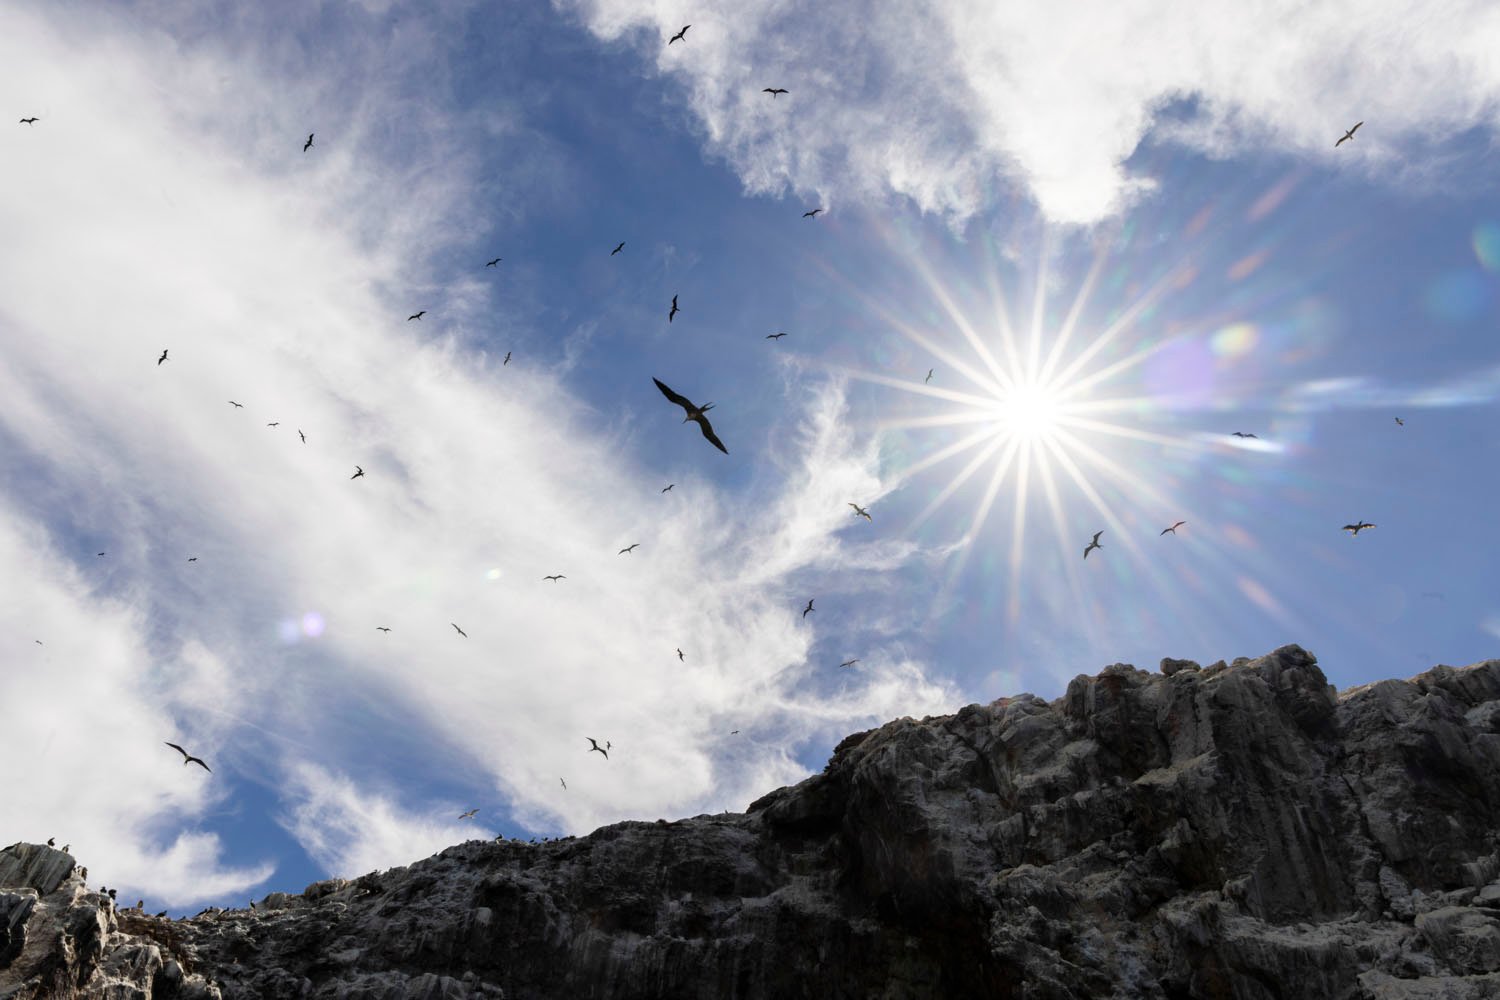 Birds fly over rocky cliffs in bright sunlight, dazzling light and a partly cloudy sky.